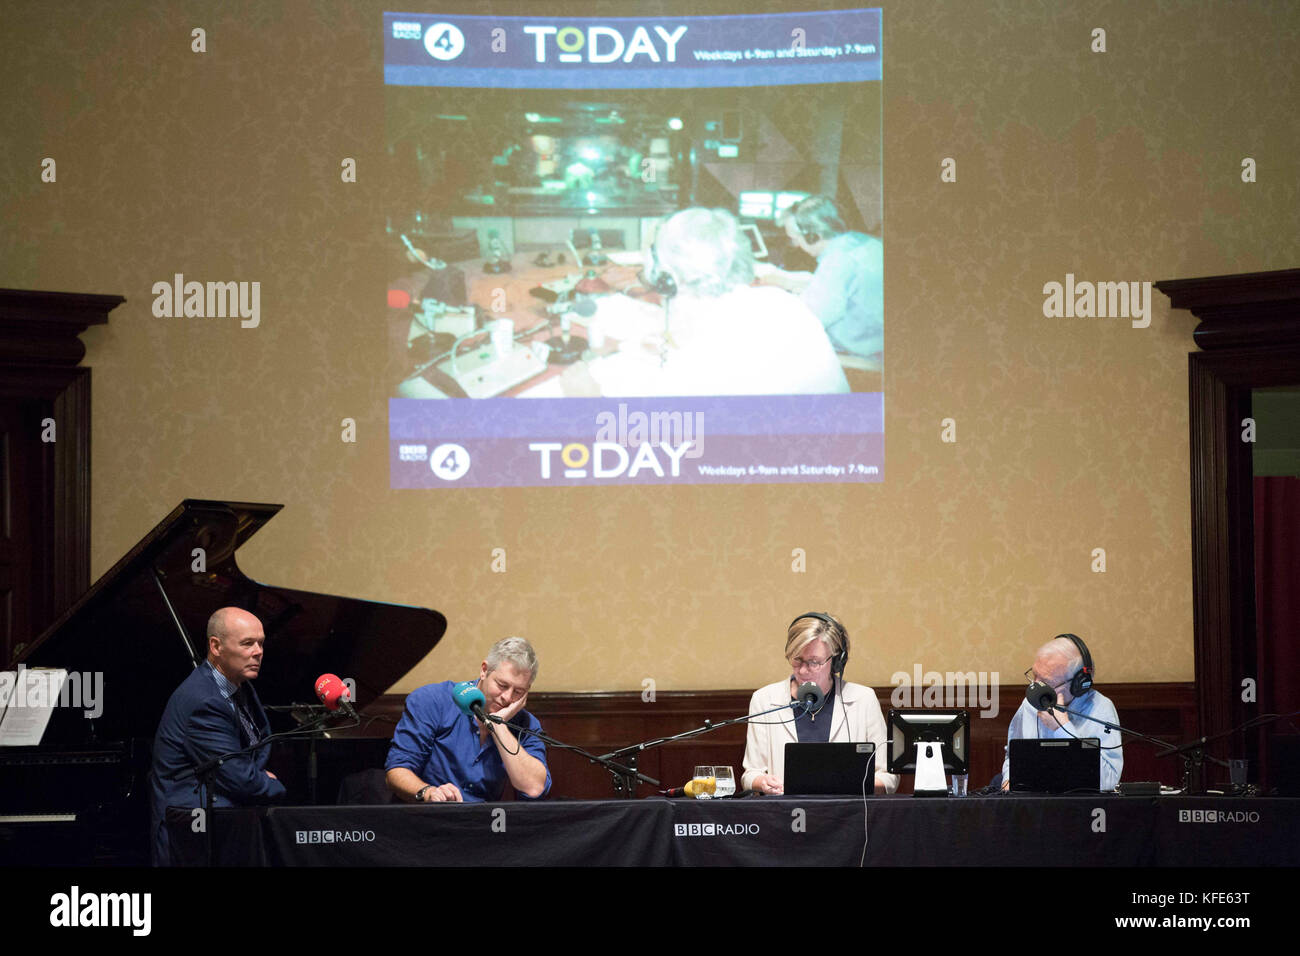 Sir Clive Woodward OBE (left) and Justin Webb (2nd left) speak with BBC Radio 4 Today presenters Sarah Montague and John Humphrys in front of an audience at Wigmore Hall in central London as the BBC Radio 4 Today programme celebrates its 60th anniversary. Stock Photo